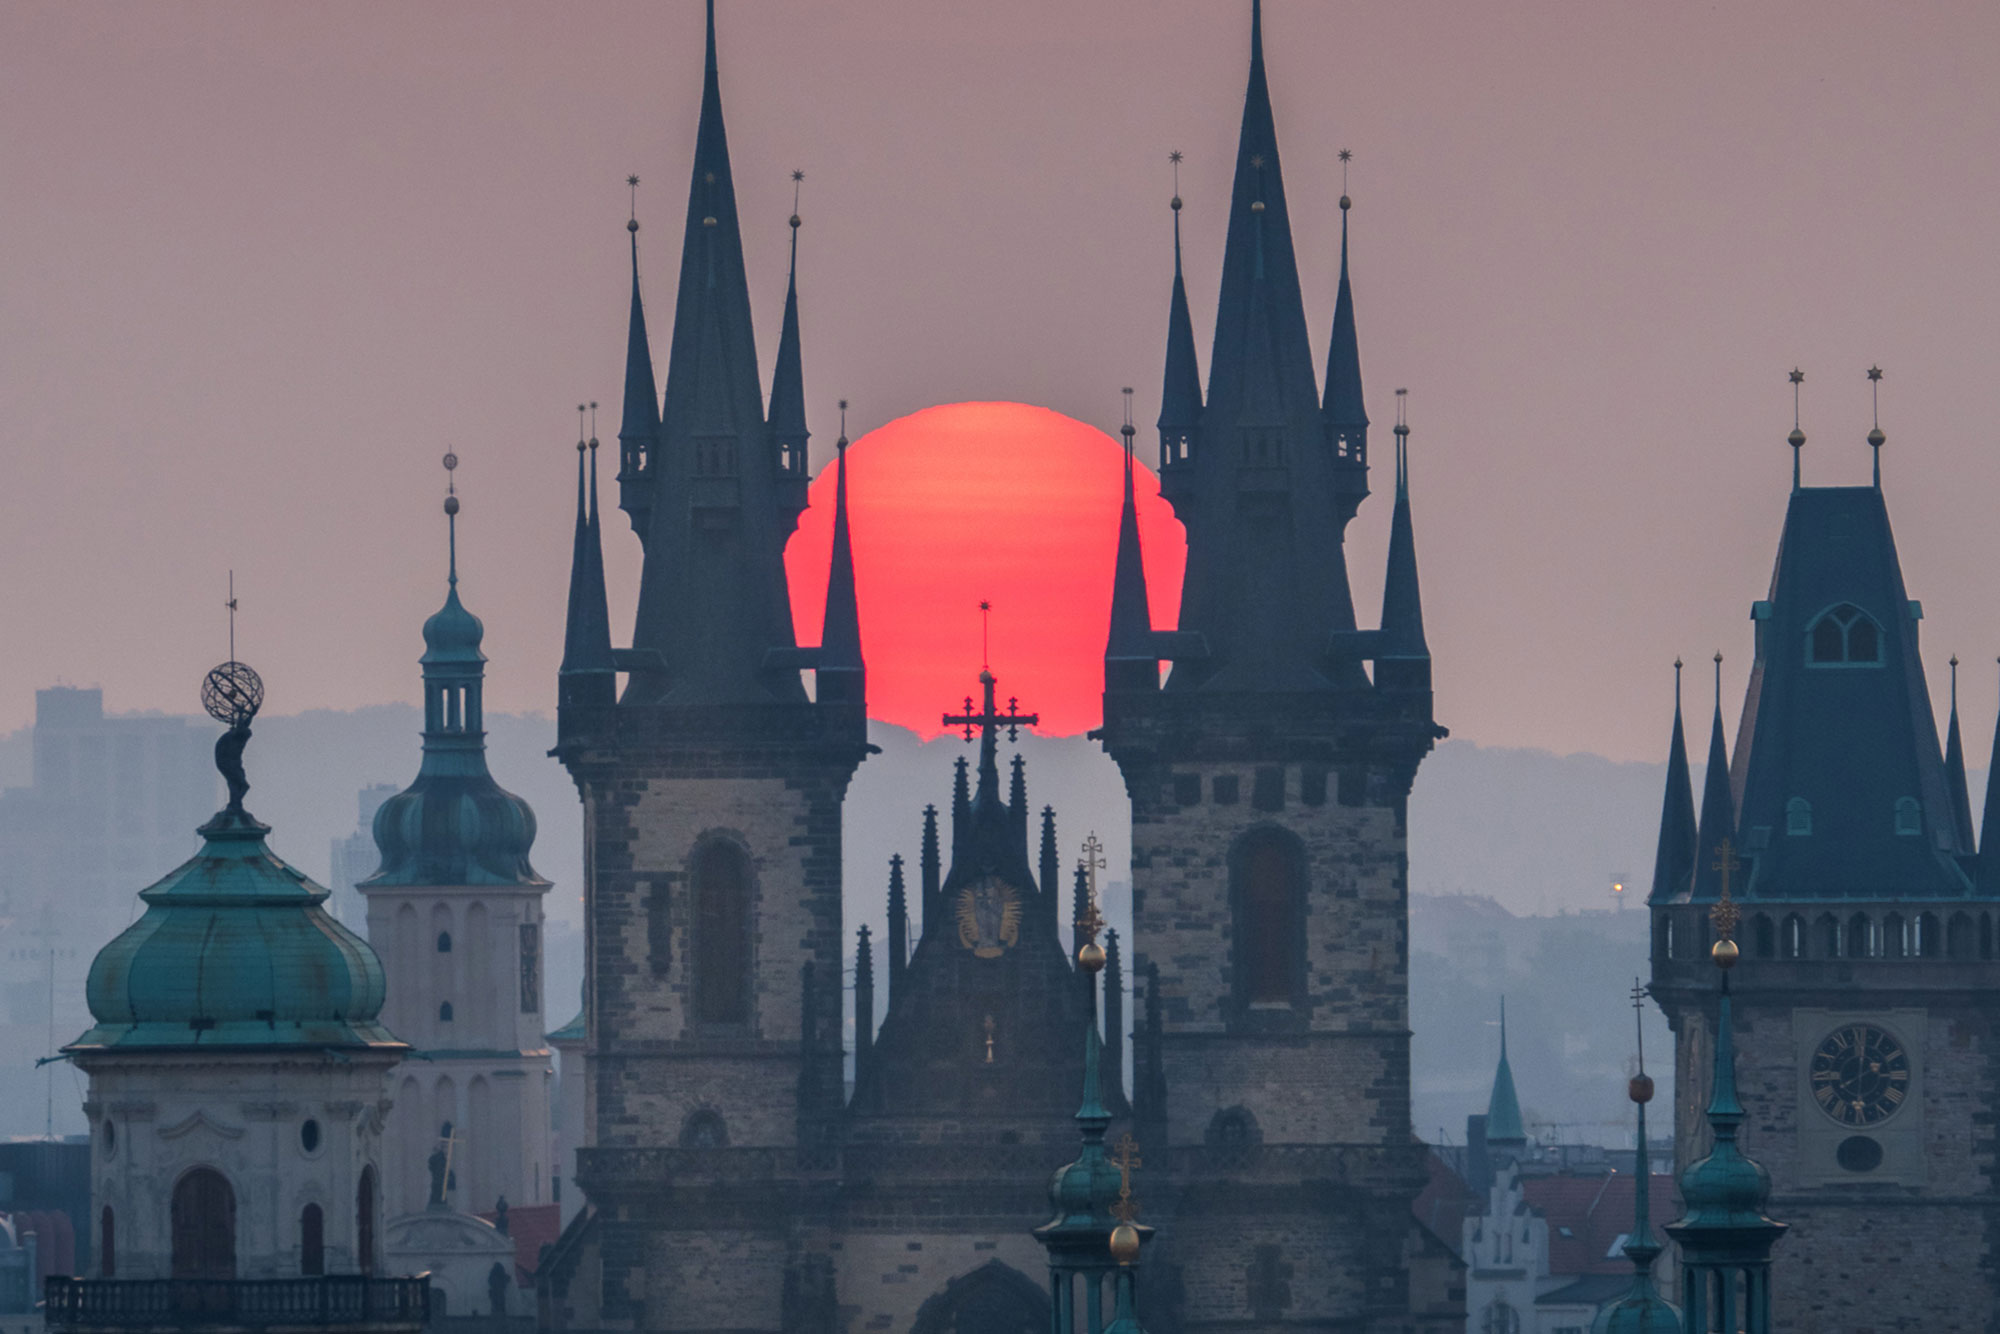 Prague: The city of thousands of spires